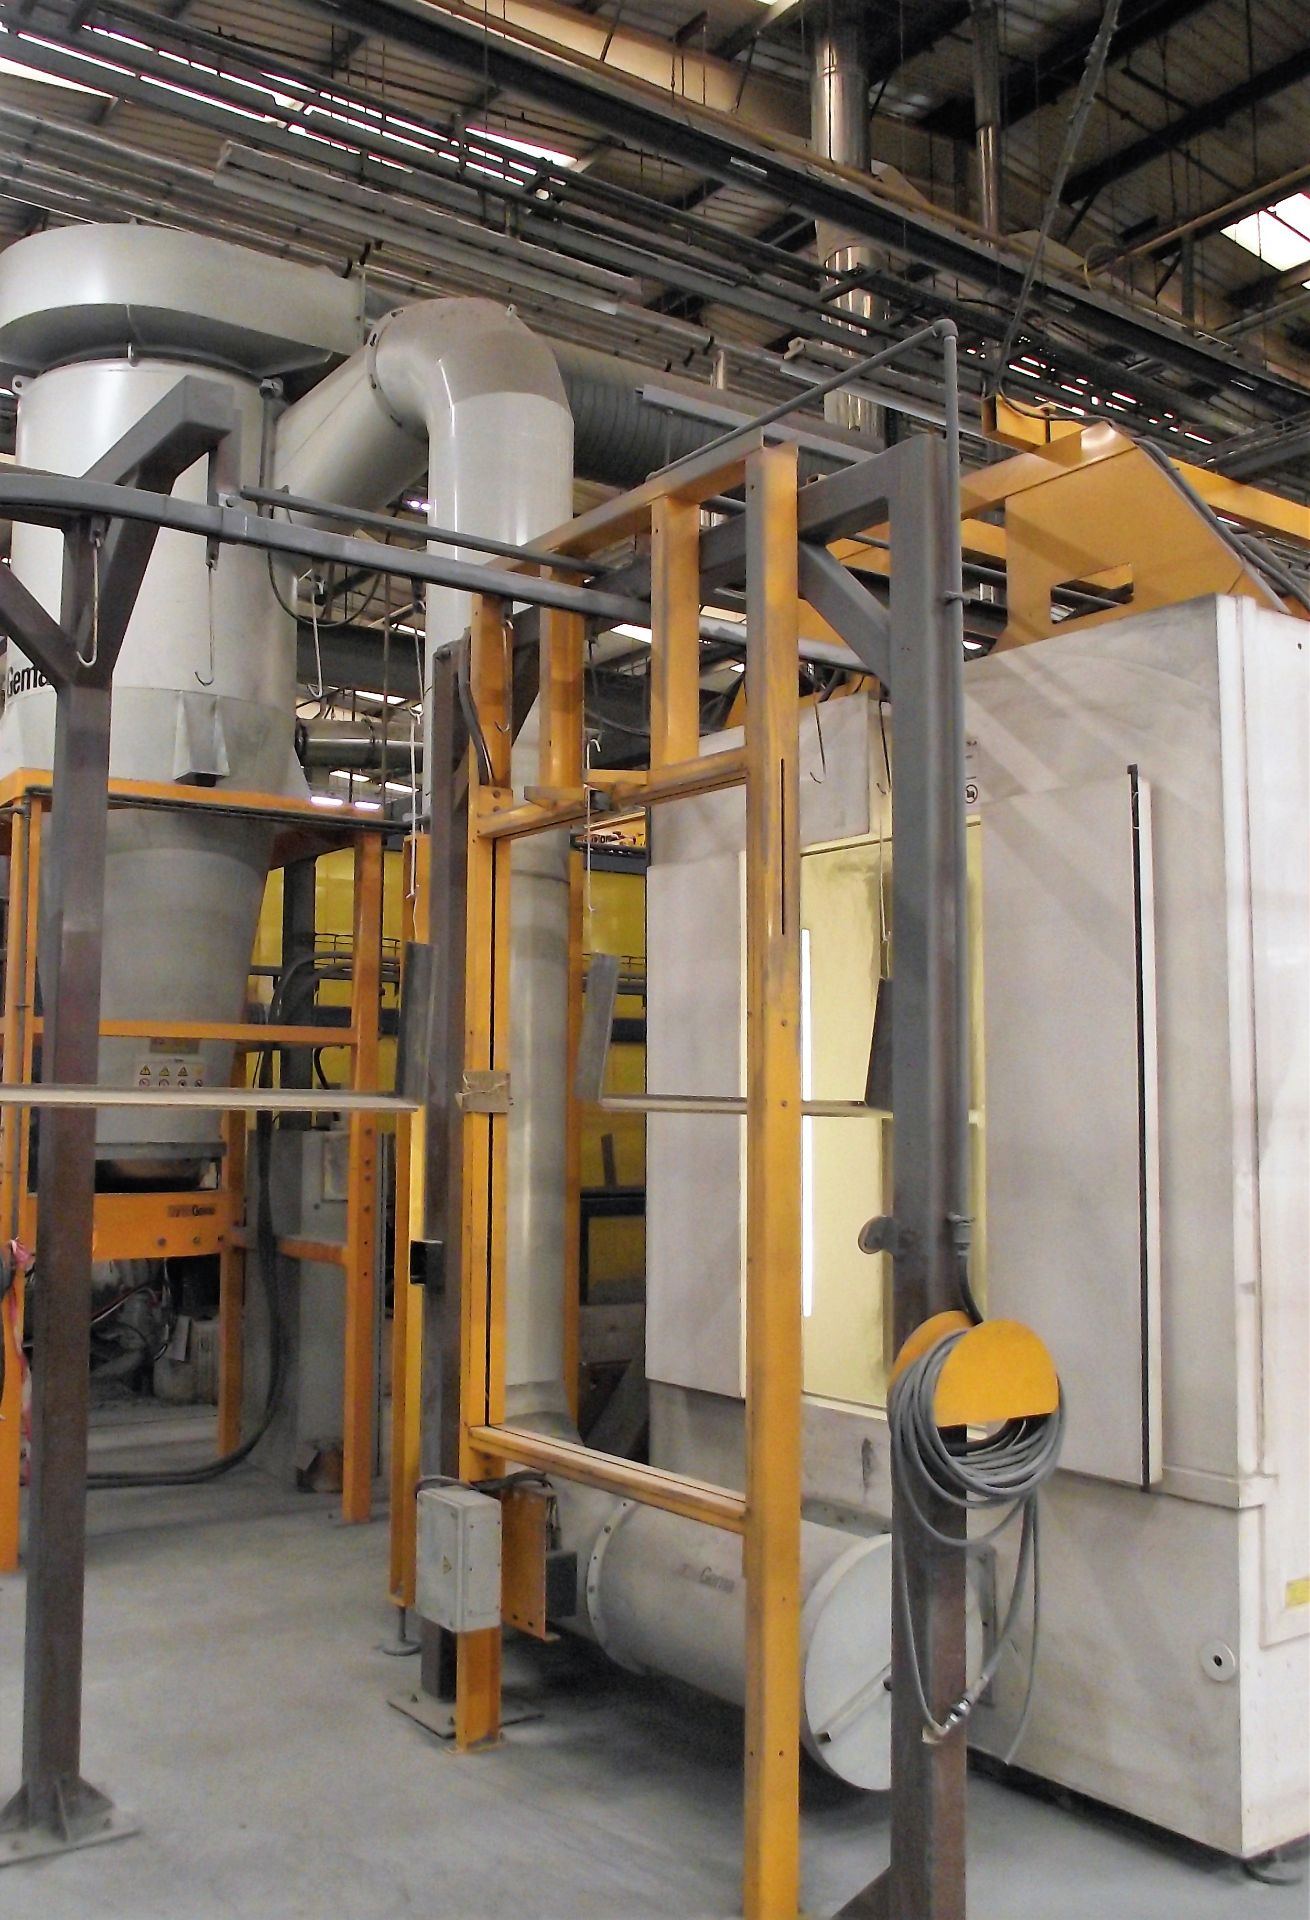 Fully Automated Powder Coating Line cw On Line Chemical "Wet" Pre-treatment Facility. - Image 4 of 18